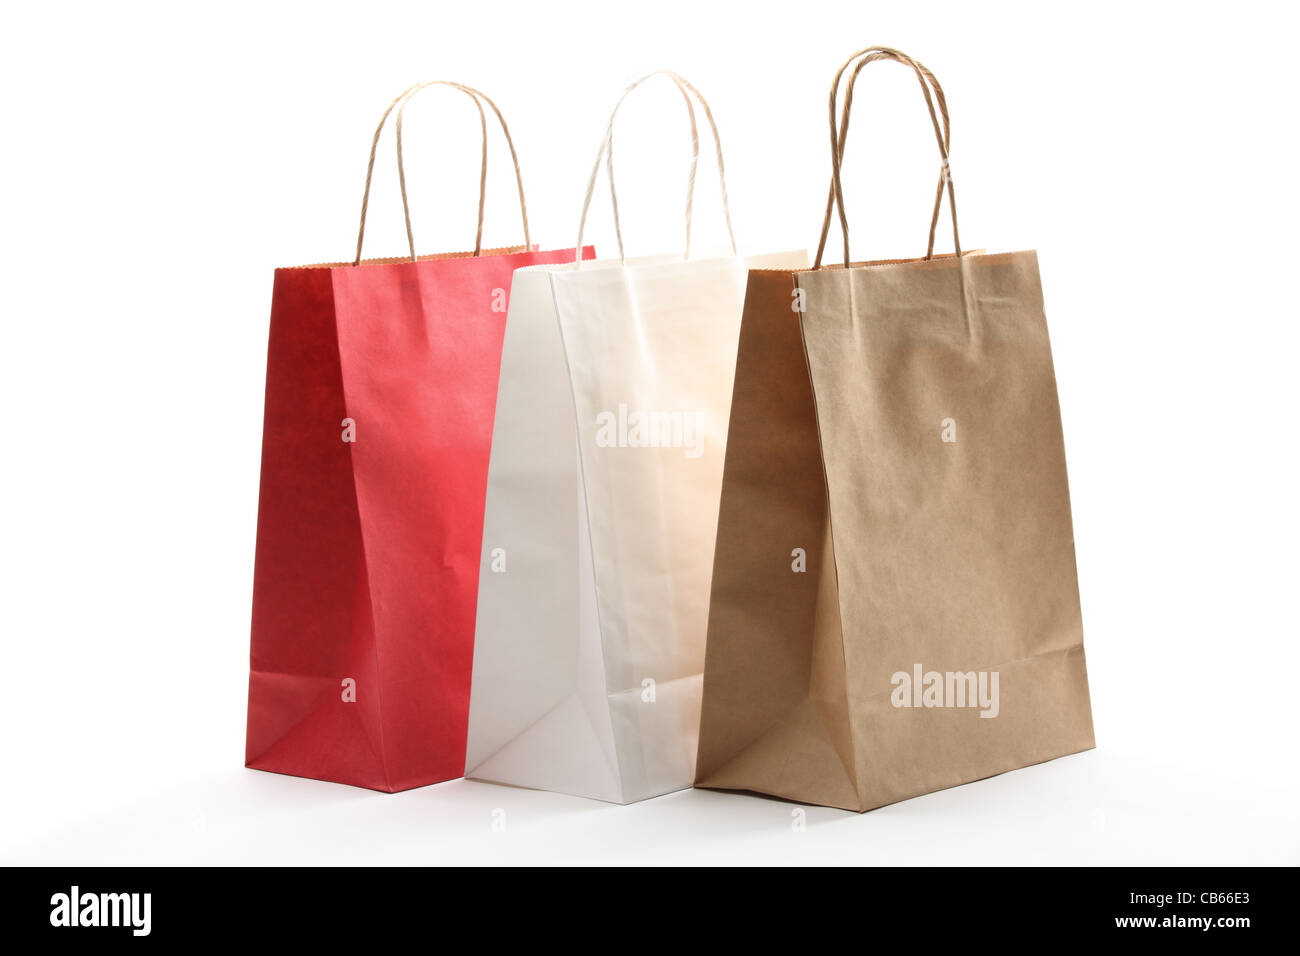 Paper shopping bags on white background. Stock Photo